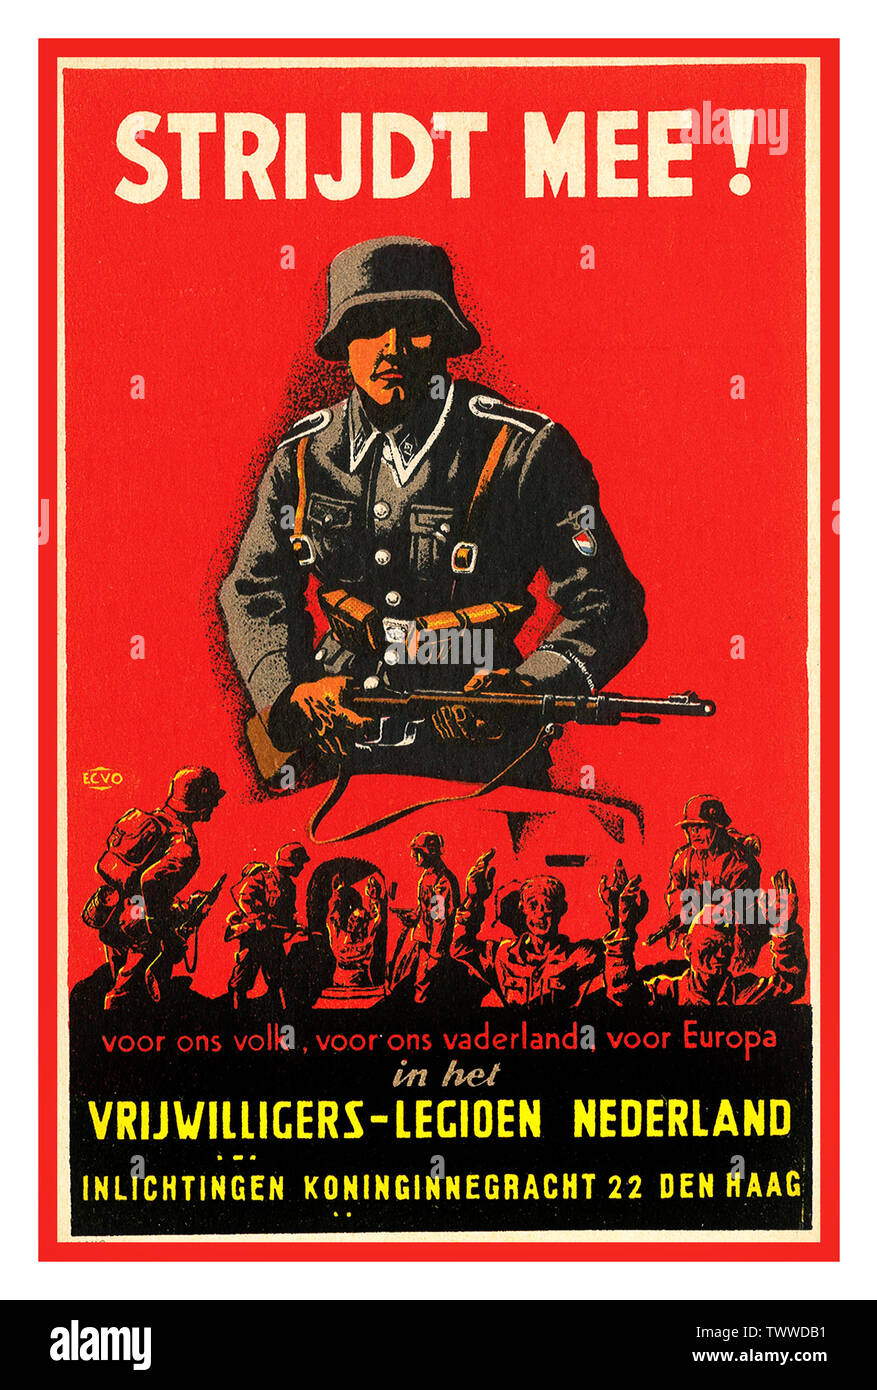 JOIN ME ! STRIJDT MEE ! Vintage WW2 Nazi Dutch Nederlands Propaganda SS / Netherlands Volunteer Legion Recruitment Poster, prominent image of SS soldier asking to 'Join Me' for good of the people, country and Europe World War II Nazi Recruitment Nederlands Holland Second World War World War II Stock Photo